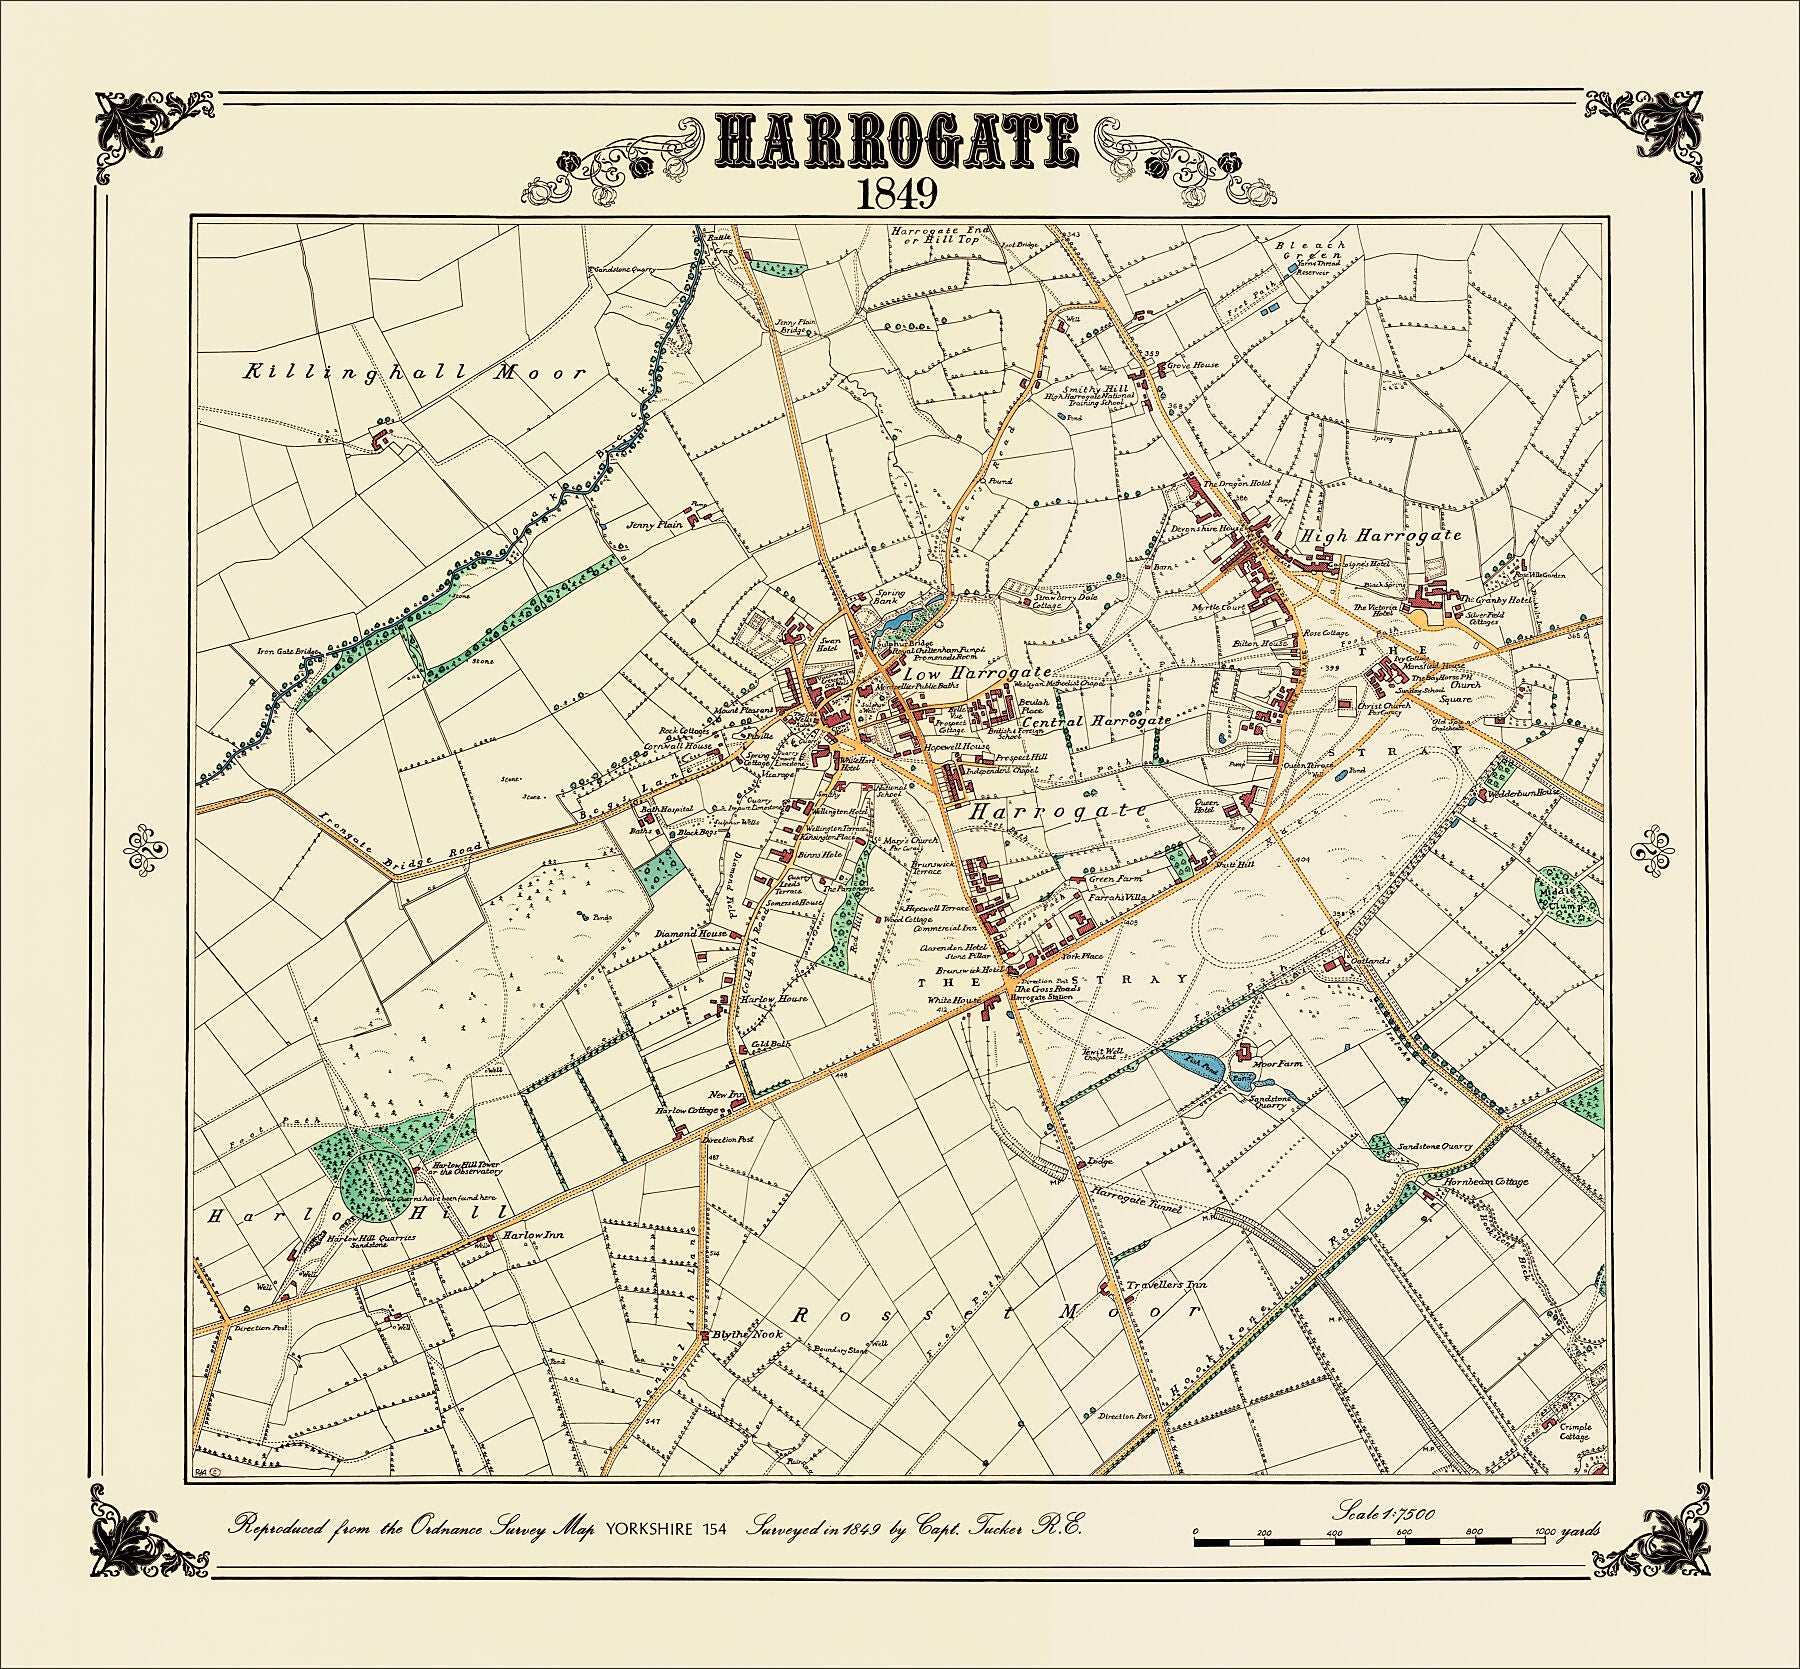 Coloured Victorian map of Harrogate in 1849 by Peter J Adams of Heritage Cartography